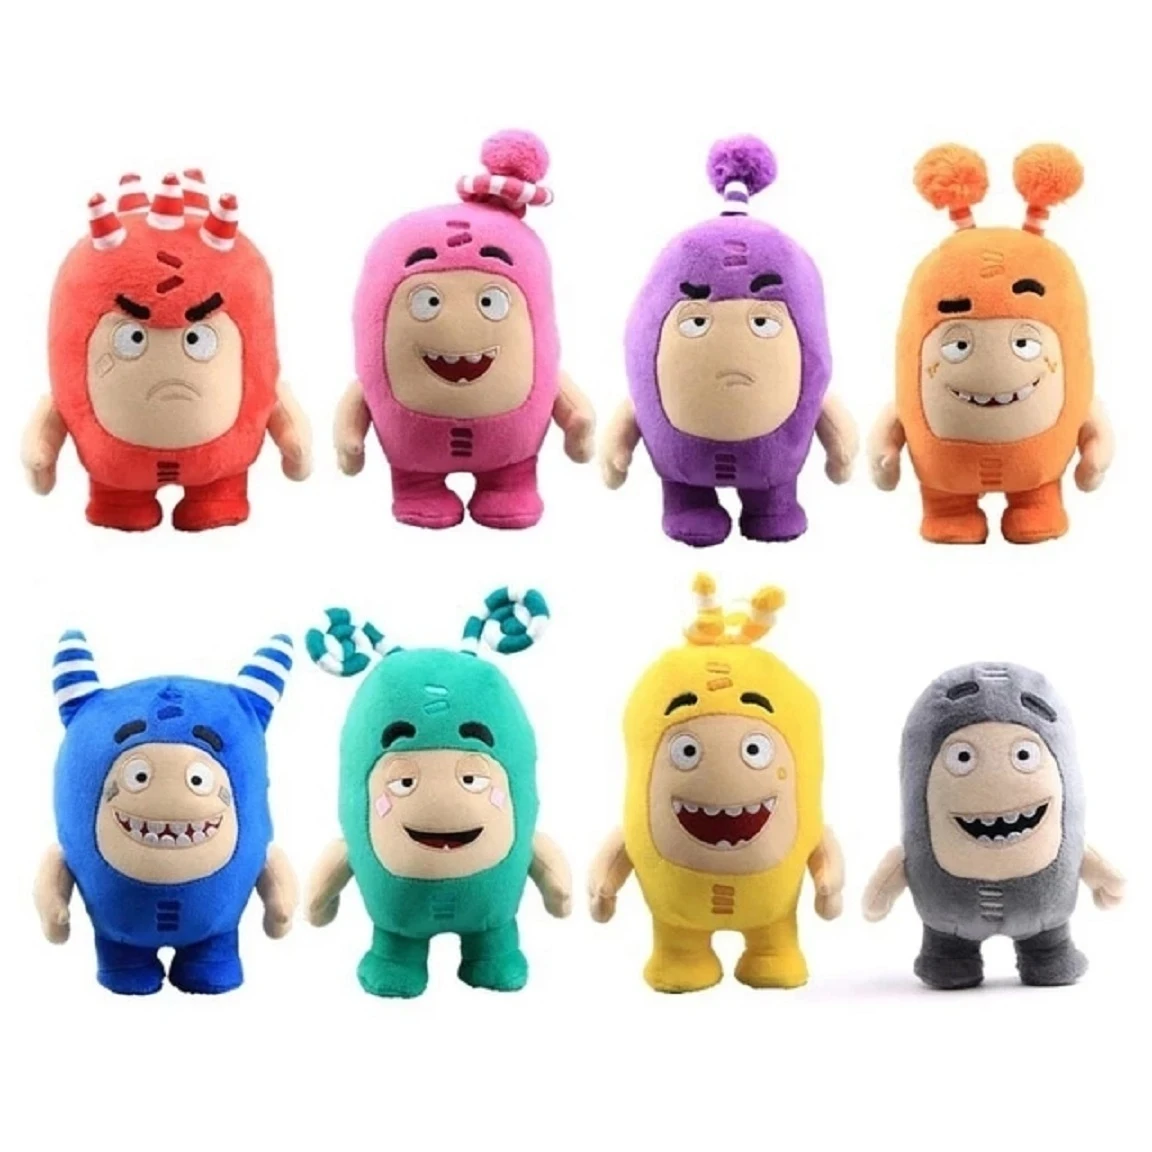 8pcs/Lot Oddbods Cartoon 18-24CM Fuse Jeff Newt Odd ZEE Bods Stuffed Plush Toy Doll For Kids Gifts PP Cotton Home Decoration anspo home security cameras system video surveillance kit cctv 8ch 720p 8pcs outdoor ahd security camera system